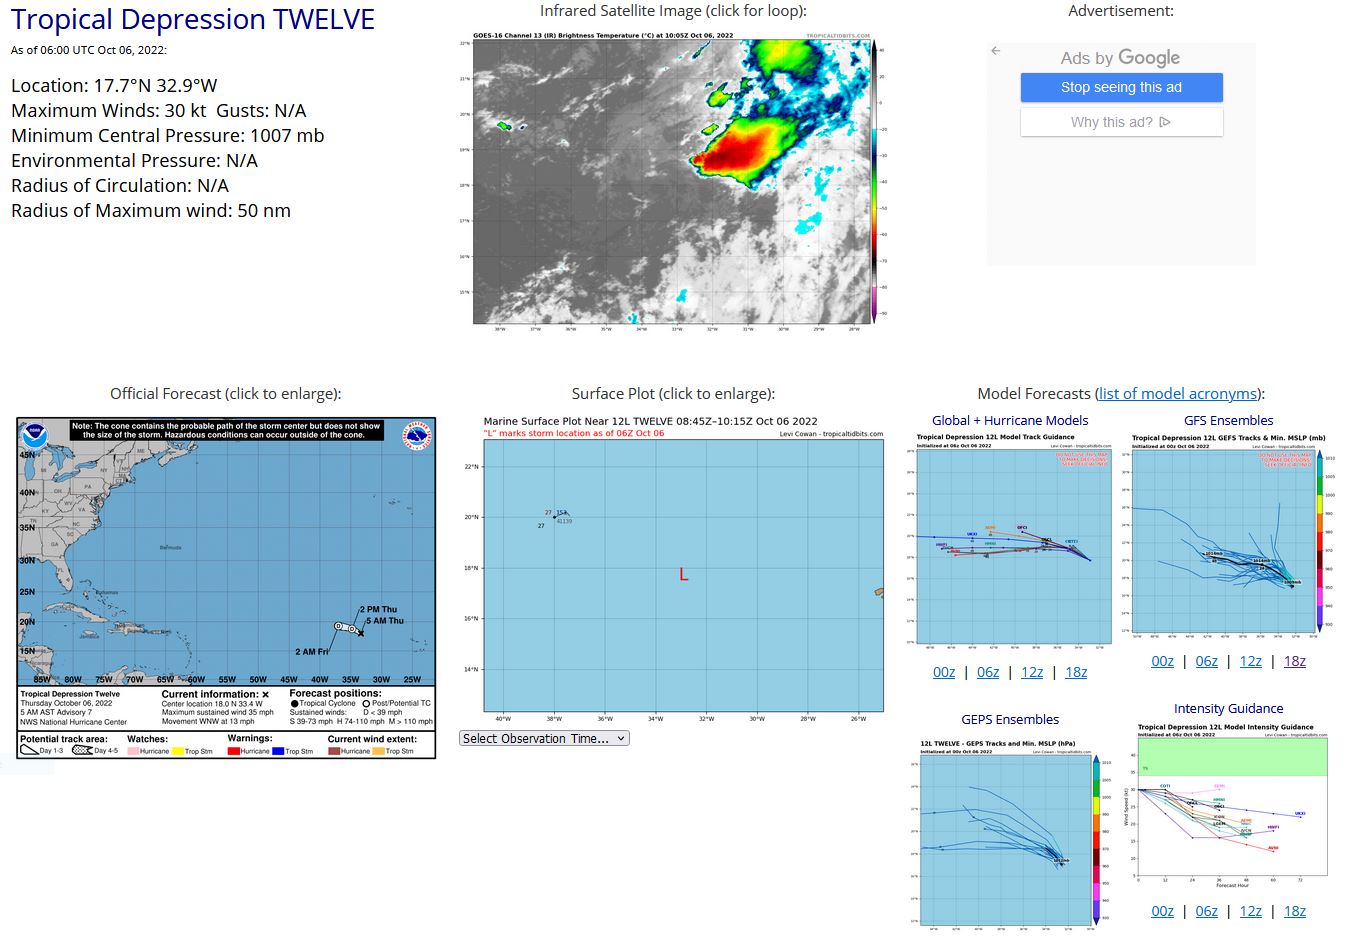 WTNT42 KNHC 060846 TCDAT2  Tropical Depression Twelve Discussion Number   7 NWS National Hurricane Center Miami FL       AL122022 500 AM AST Thu Oct 06 2022  Once again, the low-level circulation of the depression has  separated from the deep convection, which is located over 50 miles  to the east-northeast of the center.  Subjective satellite intensity  estimates have held steady and the initial intensity remains at 30  kt.  The already strong west-southwesterly vertical wind shear is  forecast to increase further in the next day or so and will likely  cause the cyclone to weaken quickly.  Most of the global models  suggest the system will open into a trough within a day or two.  The  official forecast now shows the depression becoming a post-tropical  remnant low in 12 hours and dissipated by 36 hours.  The depression is moving west-northwestward at about 11 kt.  This  general motion is expected to continue for the next day or so while  the system follows the low-level flow around a ridge to the north.   The NHC track forecast has shifted south from the previous forecast  possibly due to the more westward initial position and is on the  northern edge of the guidance envelope.   FORECAST POSITIONS AND MAX WINDS  INIT  06/0900Z 18.0N  33.4W   30 KT  35 MPH  12H  06/1800Z 18.8N  34.8W   30 KT  35 MPH...POST-TROP/REMNT LOW  24H  07/0600Z 19.3N  37.0W   25 KT  30 MPH...POST-TROP/REMNT LOW  36H  07/1800Z...DISSIPATED  $$ Forecaster Bucci